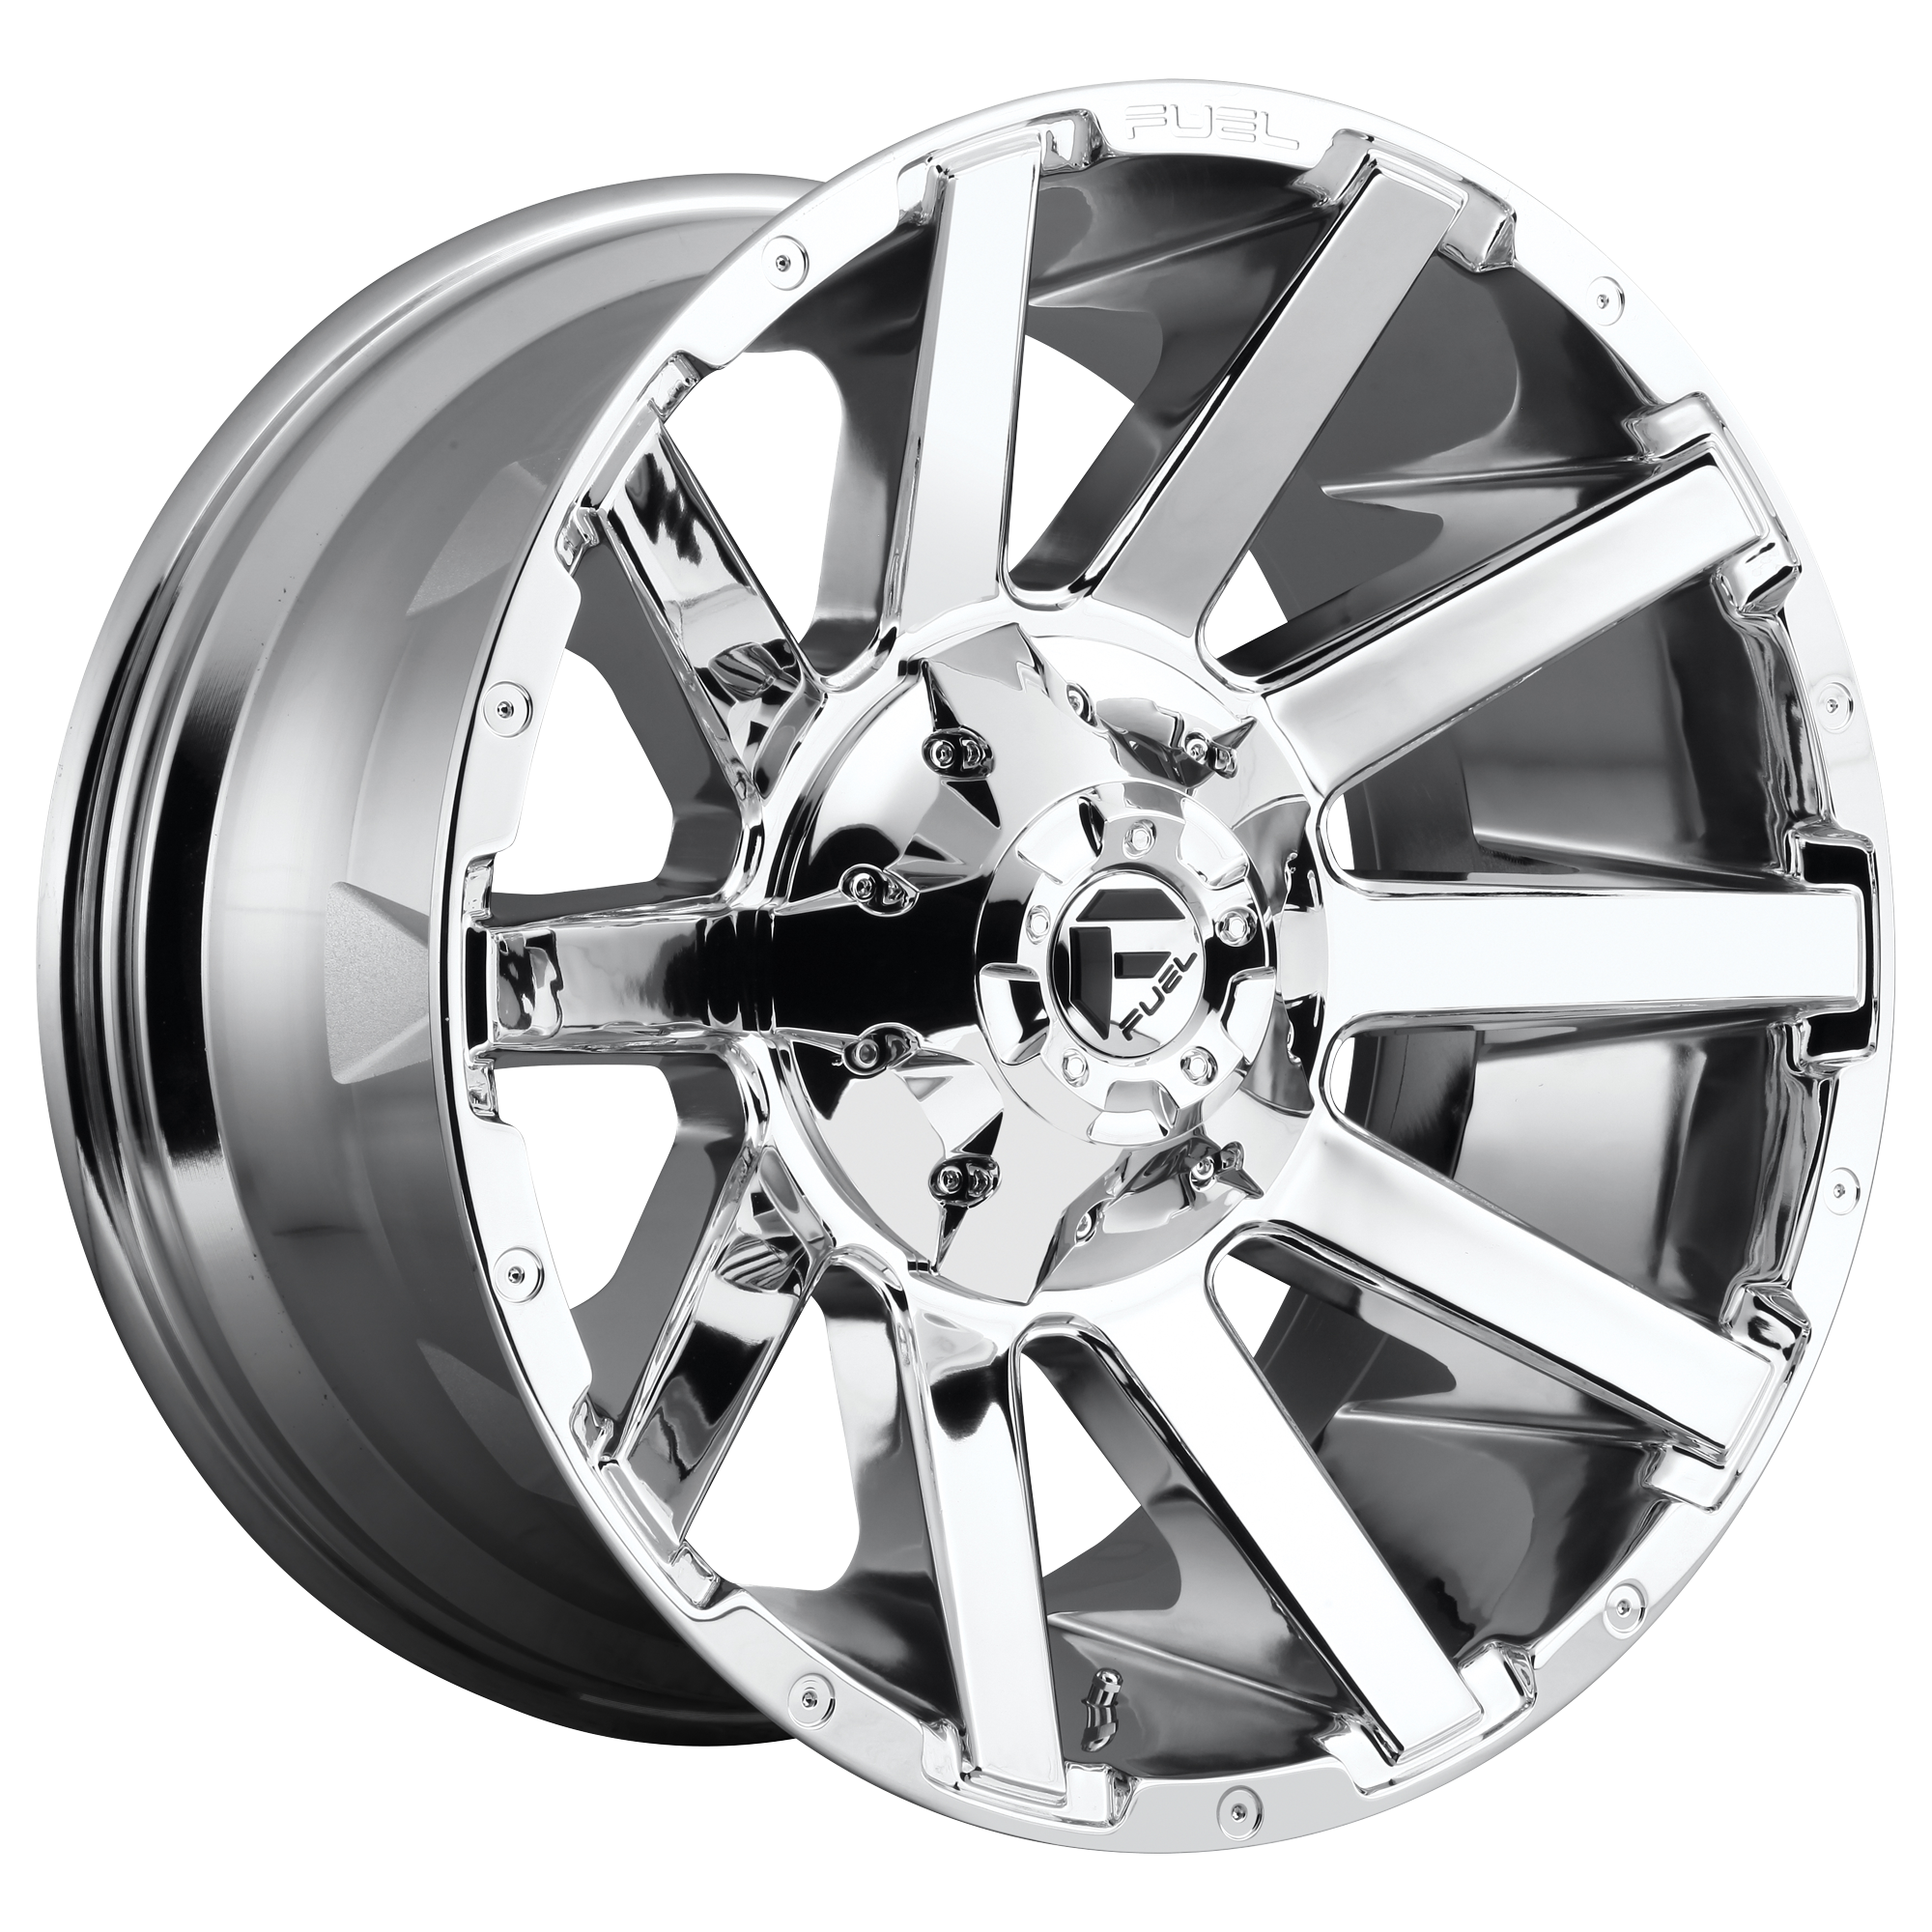 CONTRA 22x10 8x170.00 CHROME PLATED (-18 mm) - Tires and Engine Performance